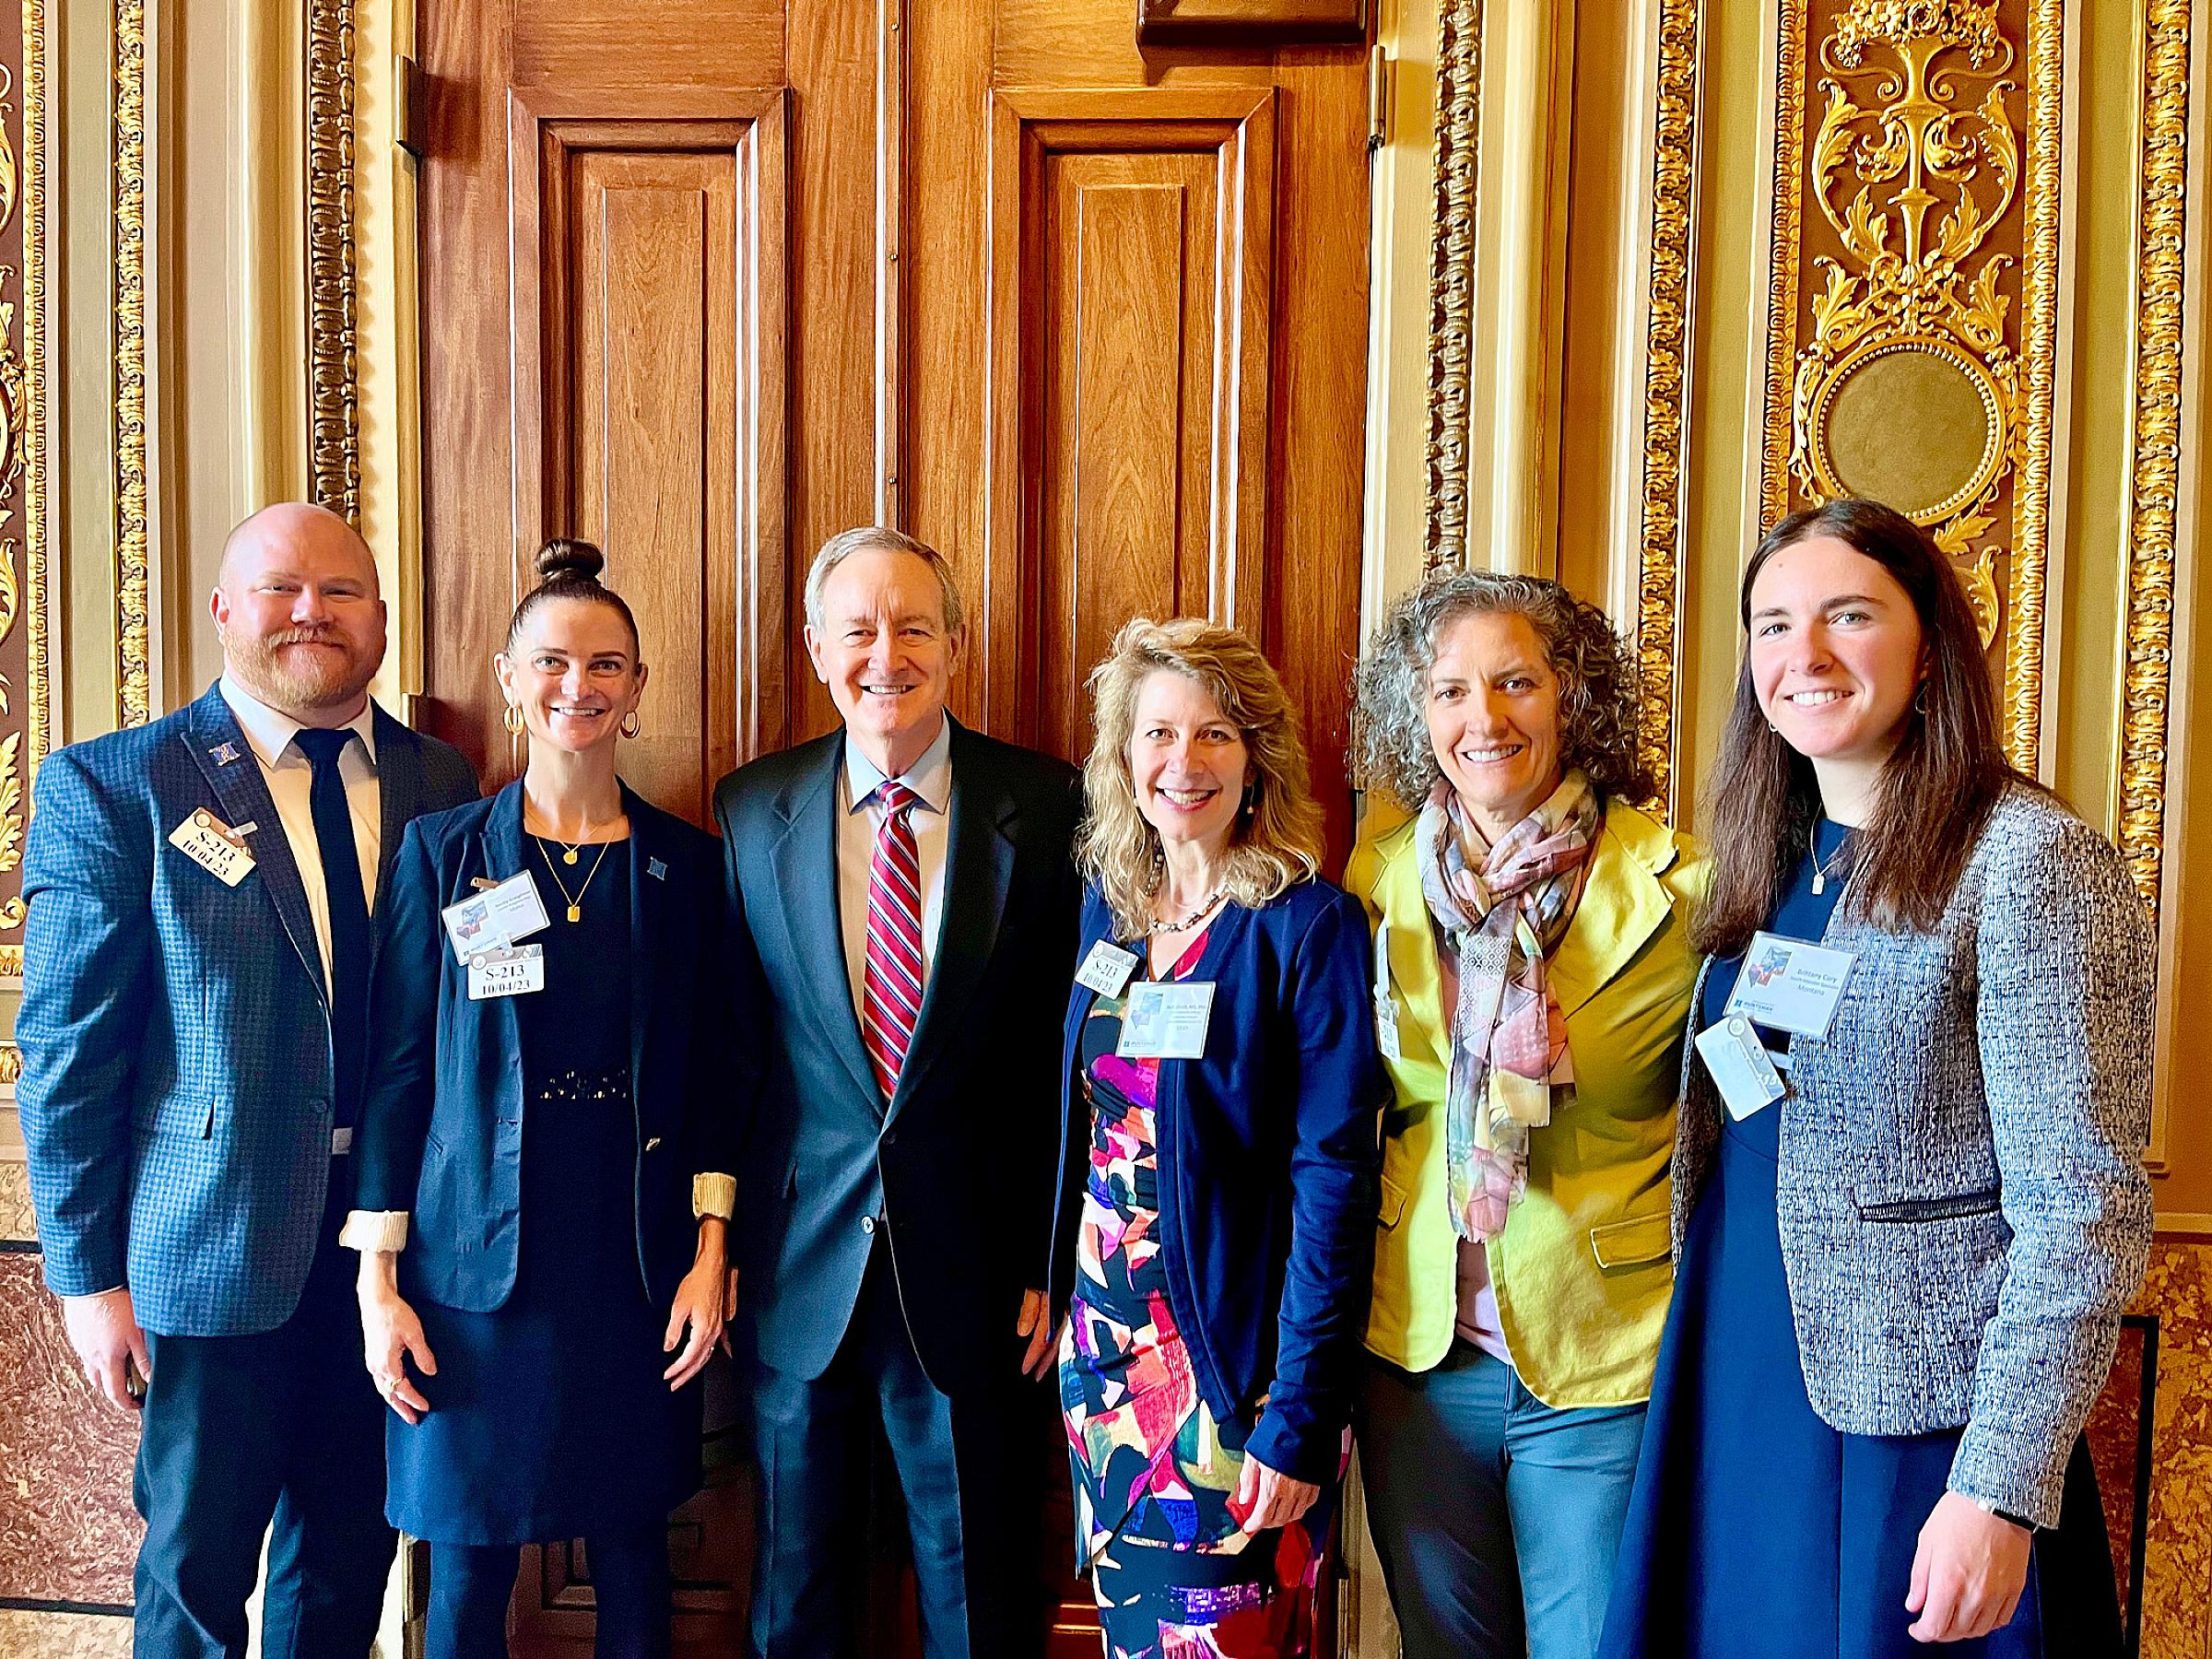 Senator Mike Crapo (ID) with Garrett Harding, Becky Creighton, Dr. Neli Ulrich, Theresa Vonada, and Brittany Cory after their meeting.